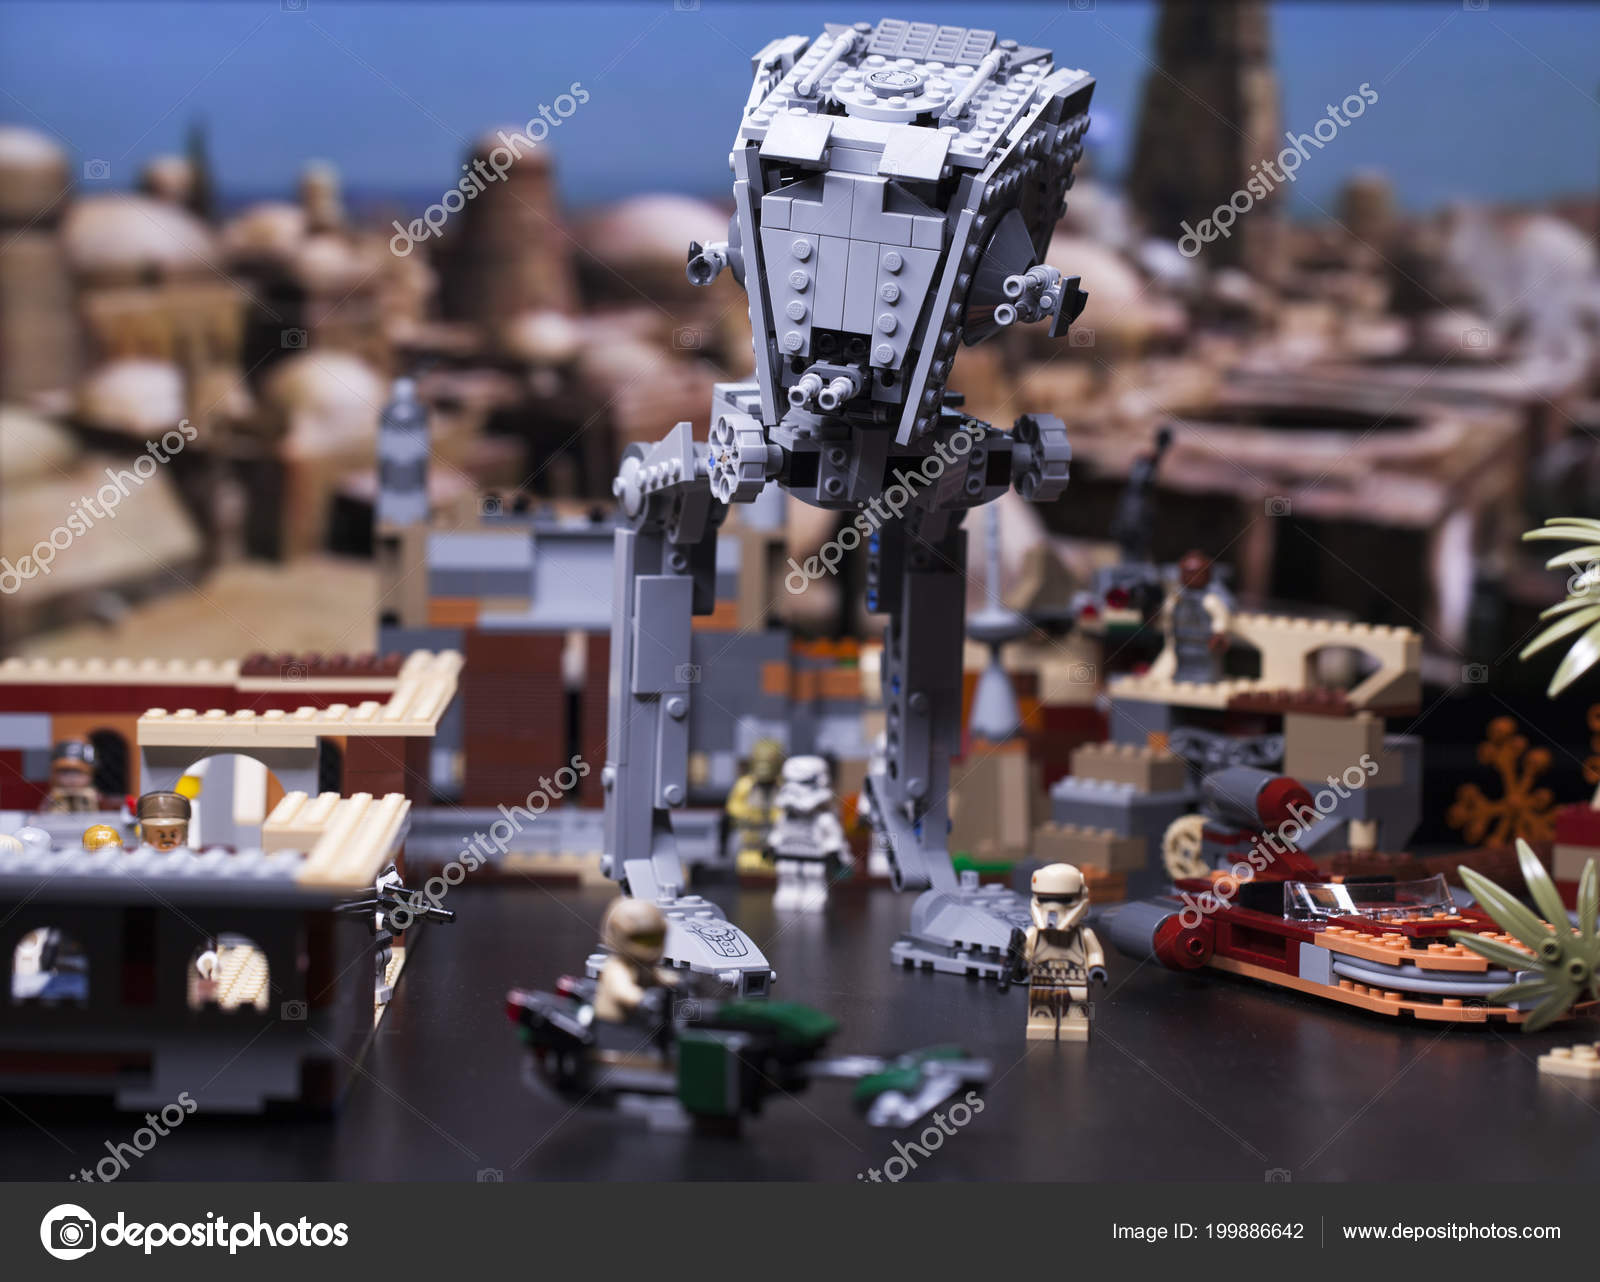 lego star wars at st 75153